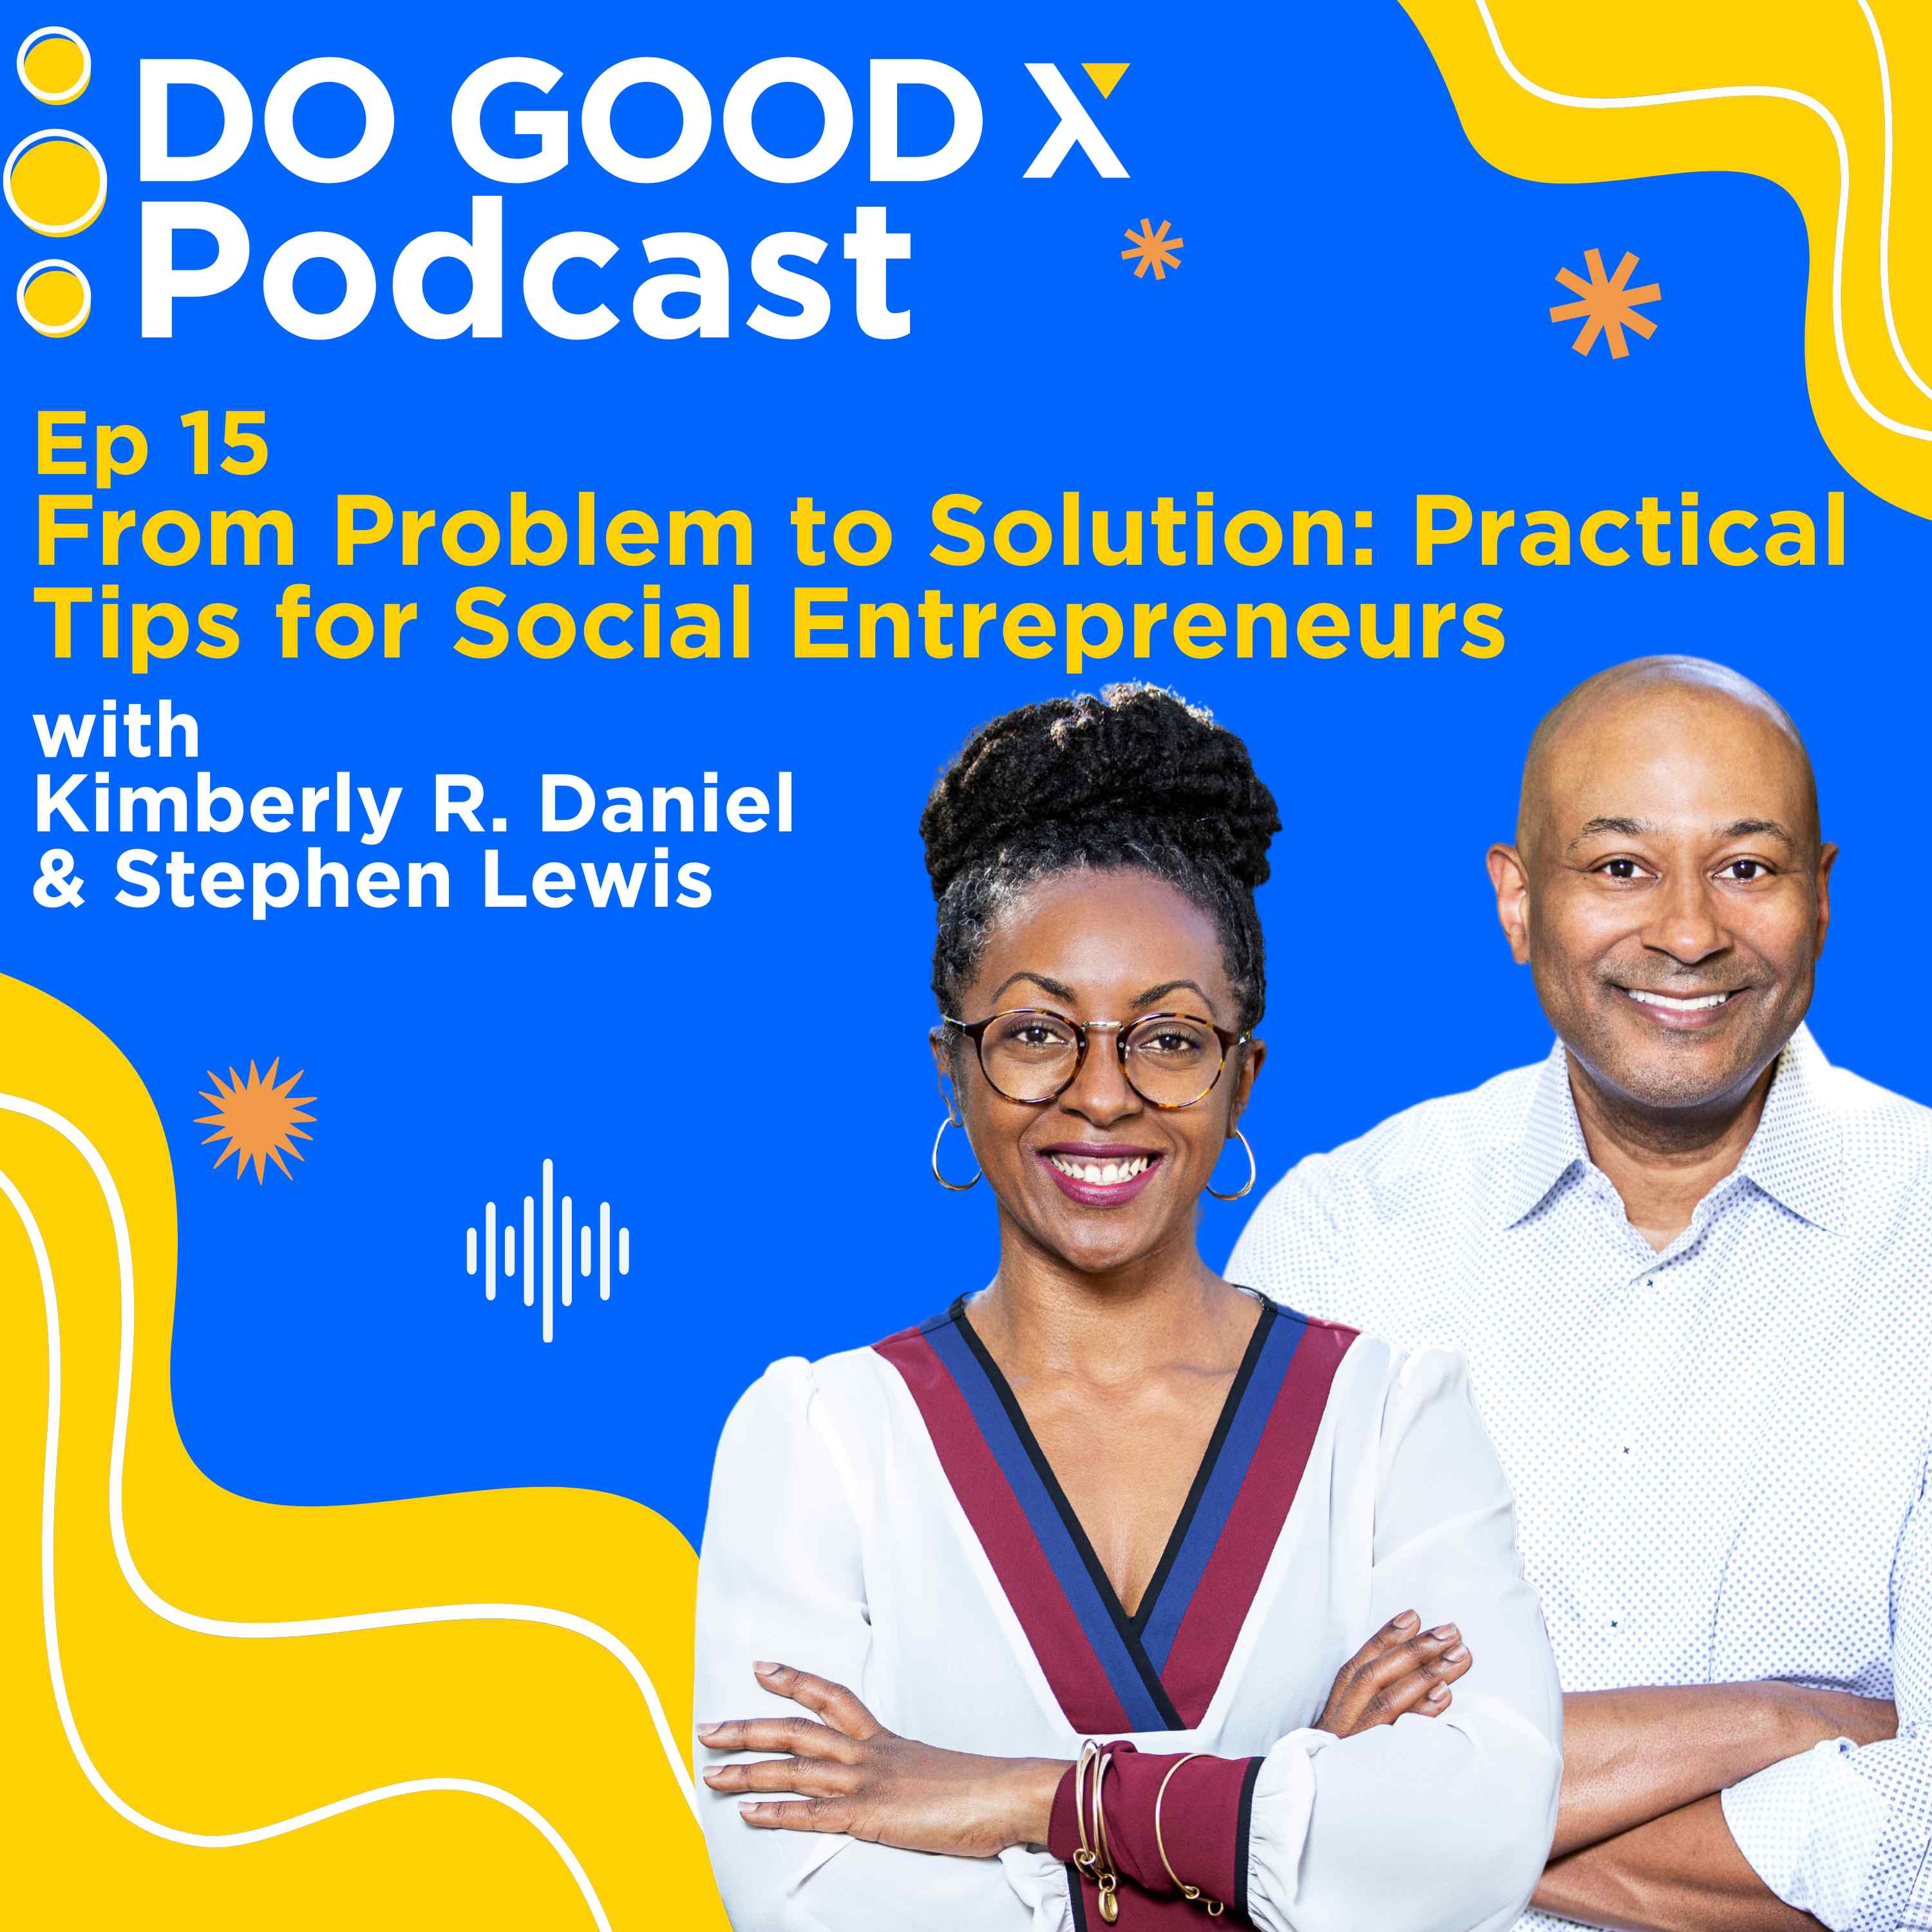 Ep. 15 From Problem to Solution: Practical Tips for Social Entrepreneurs